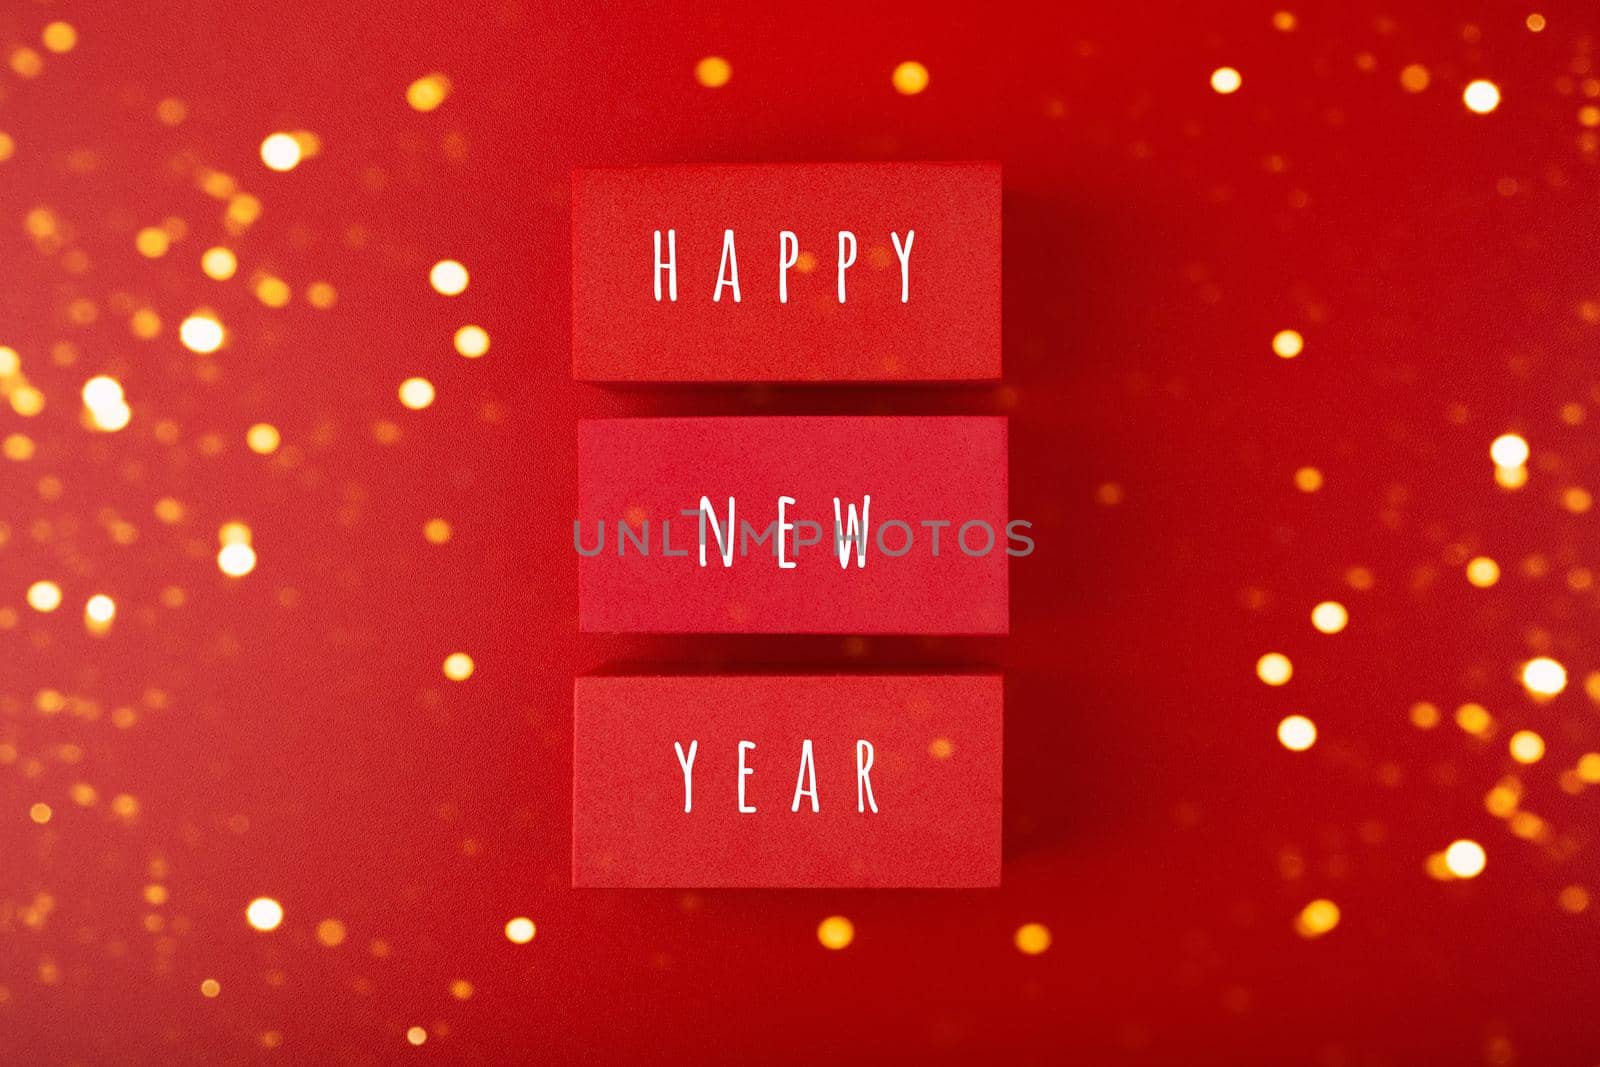 Happy New Year red minimal concept with golden bokeh. Modern flat lay with red toy blocks with written Happy New Year text on red background with golden bokeh. Greeting card for upcoming year